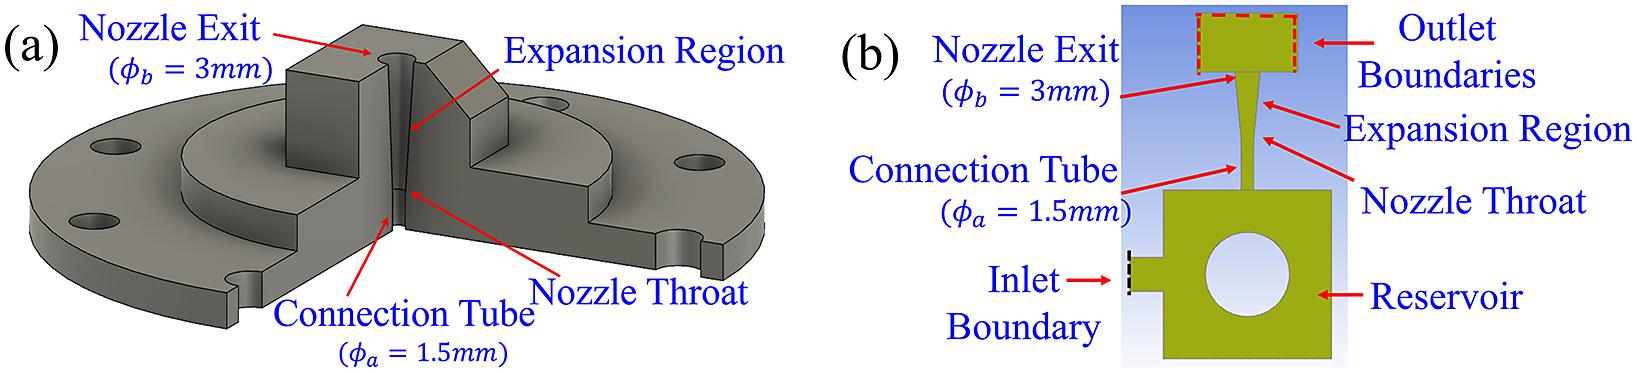 (a) Sketch of the simple-conical nozzle. (b) Schematic of the fluid dynamics simulation domains for the simple-conical nozzle.